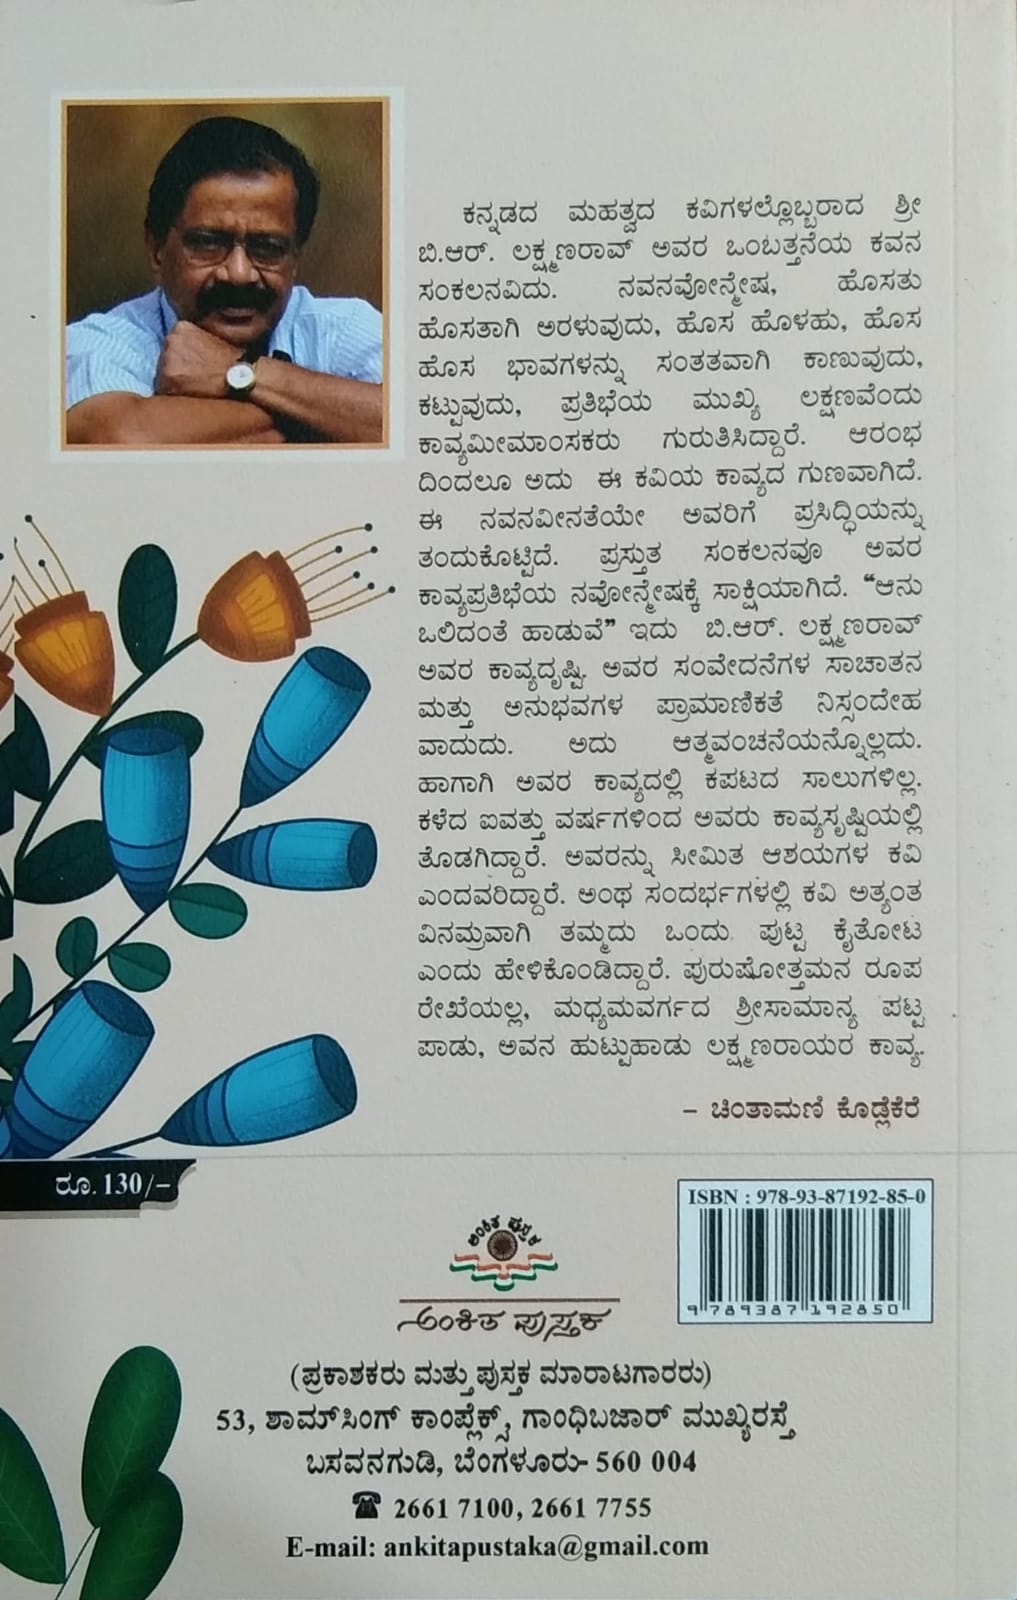 This ia a Book 'Navonmesha' is a Collection of Poems which is written by B. R. Lakshmanrao and Published by Ankita Pustaka